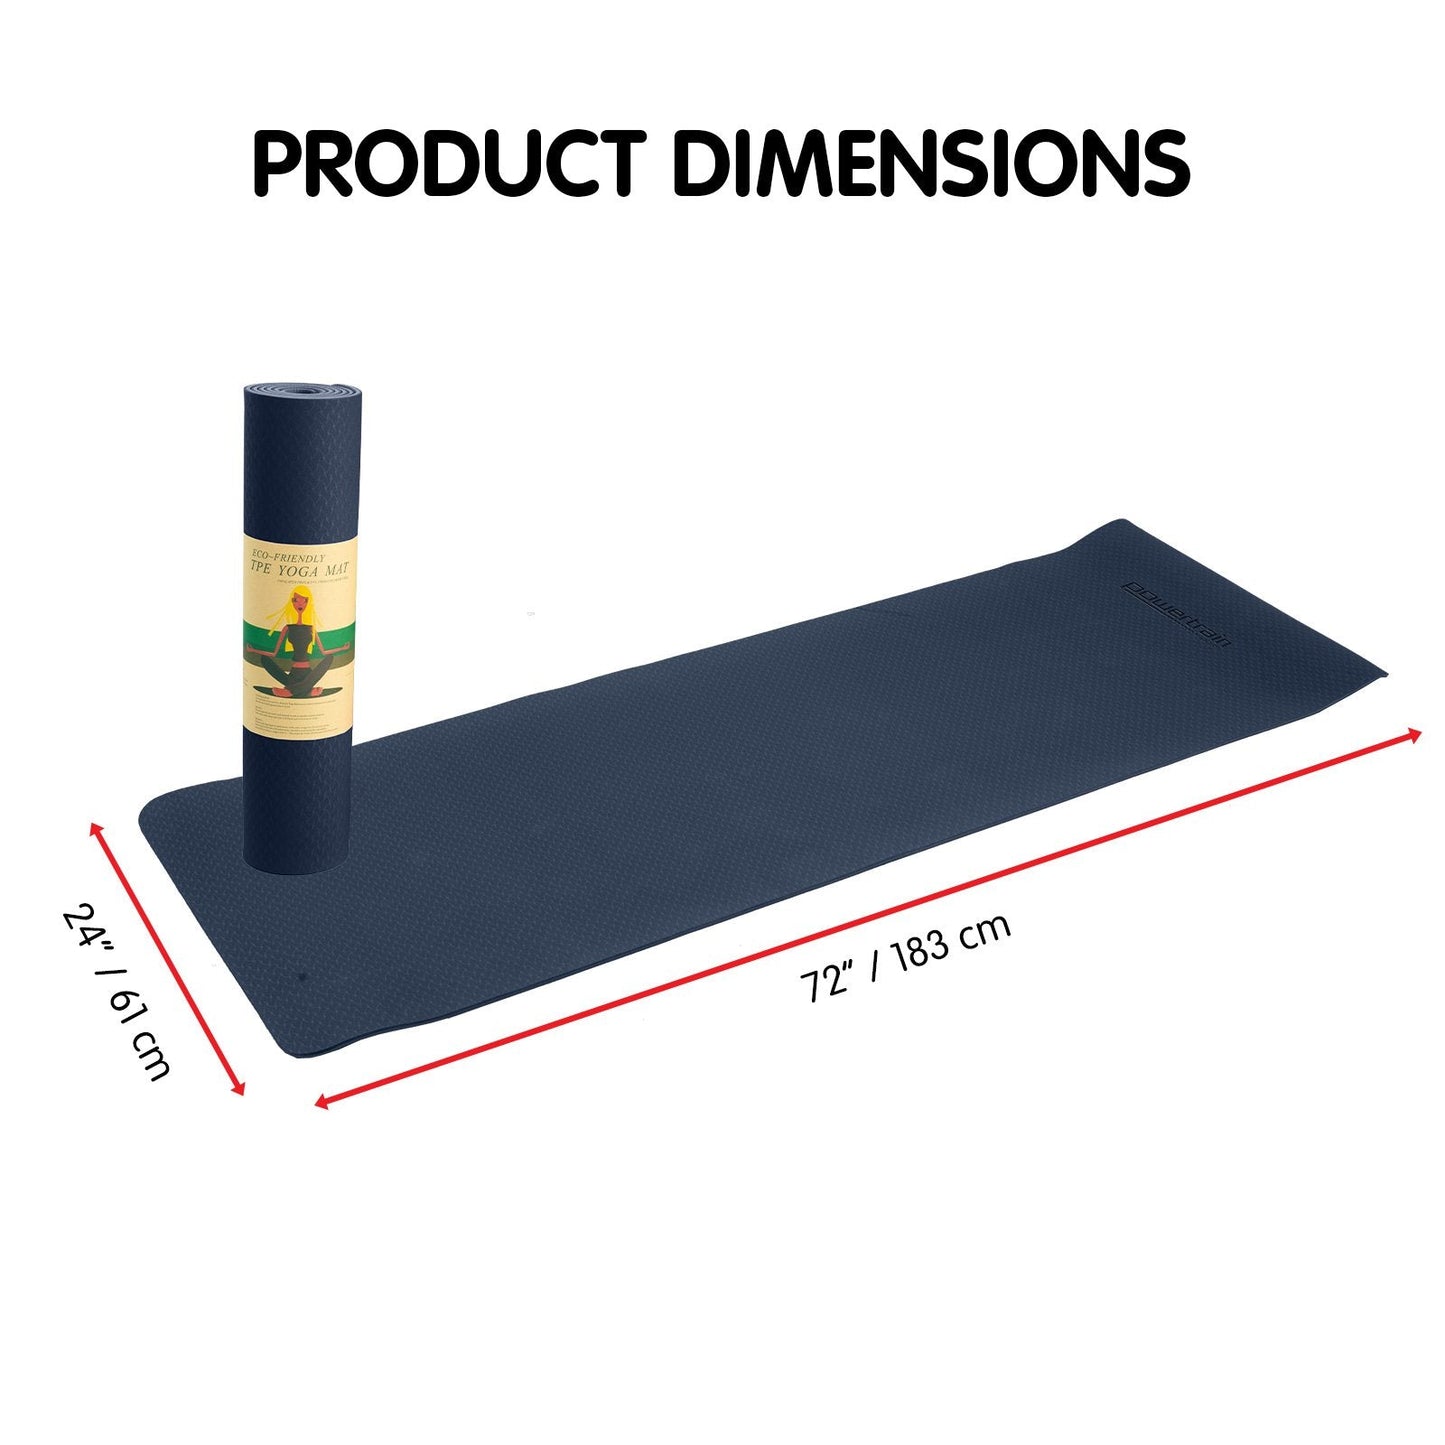 Sports & Fitness > Fitness Accessories - Powertrain Eco-friendly Dual Layer 6mm Yoga Mat | Navy | Non-slip Surface And Carry Strap For Ultimate Comfort And Portability